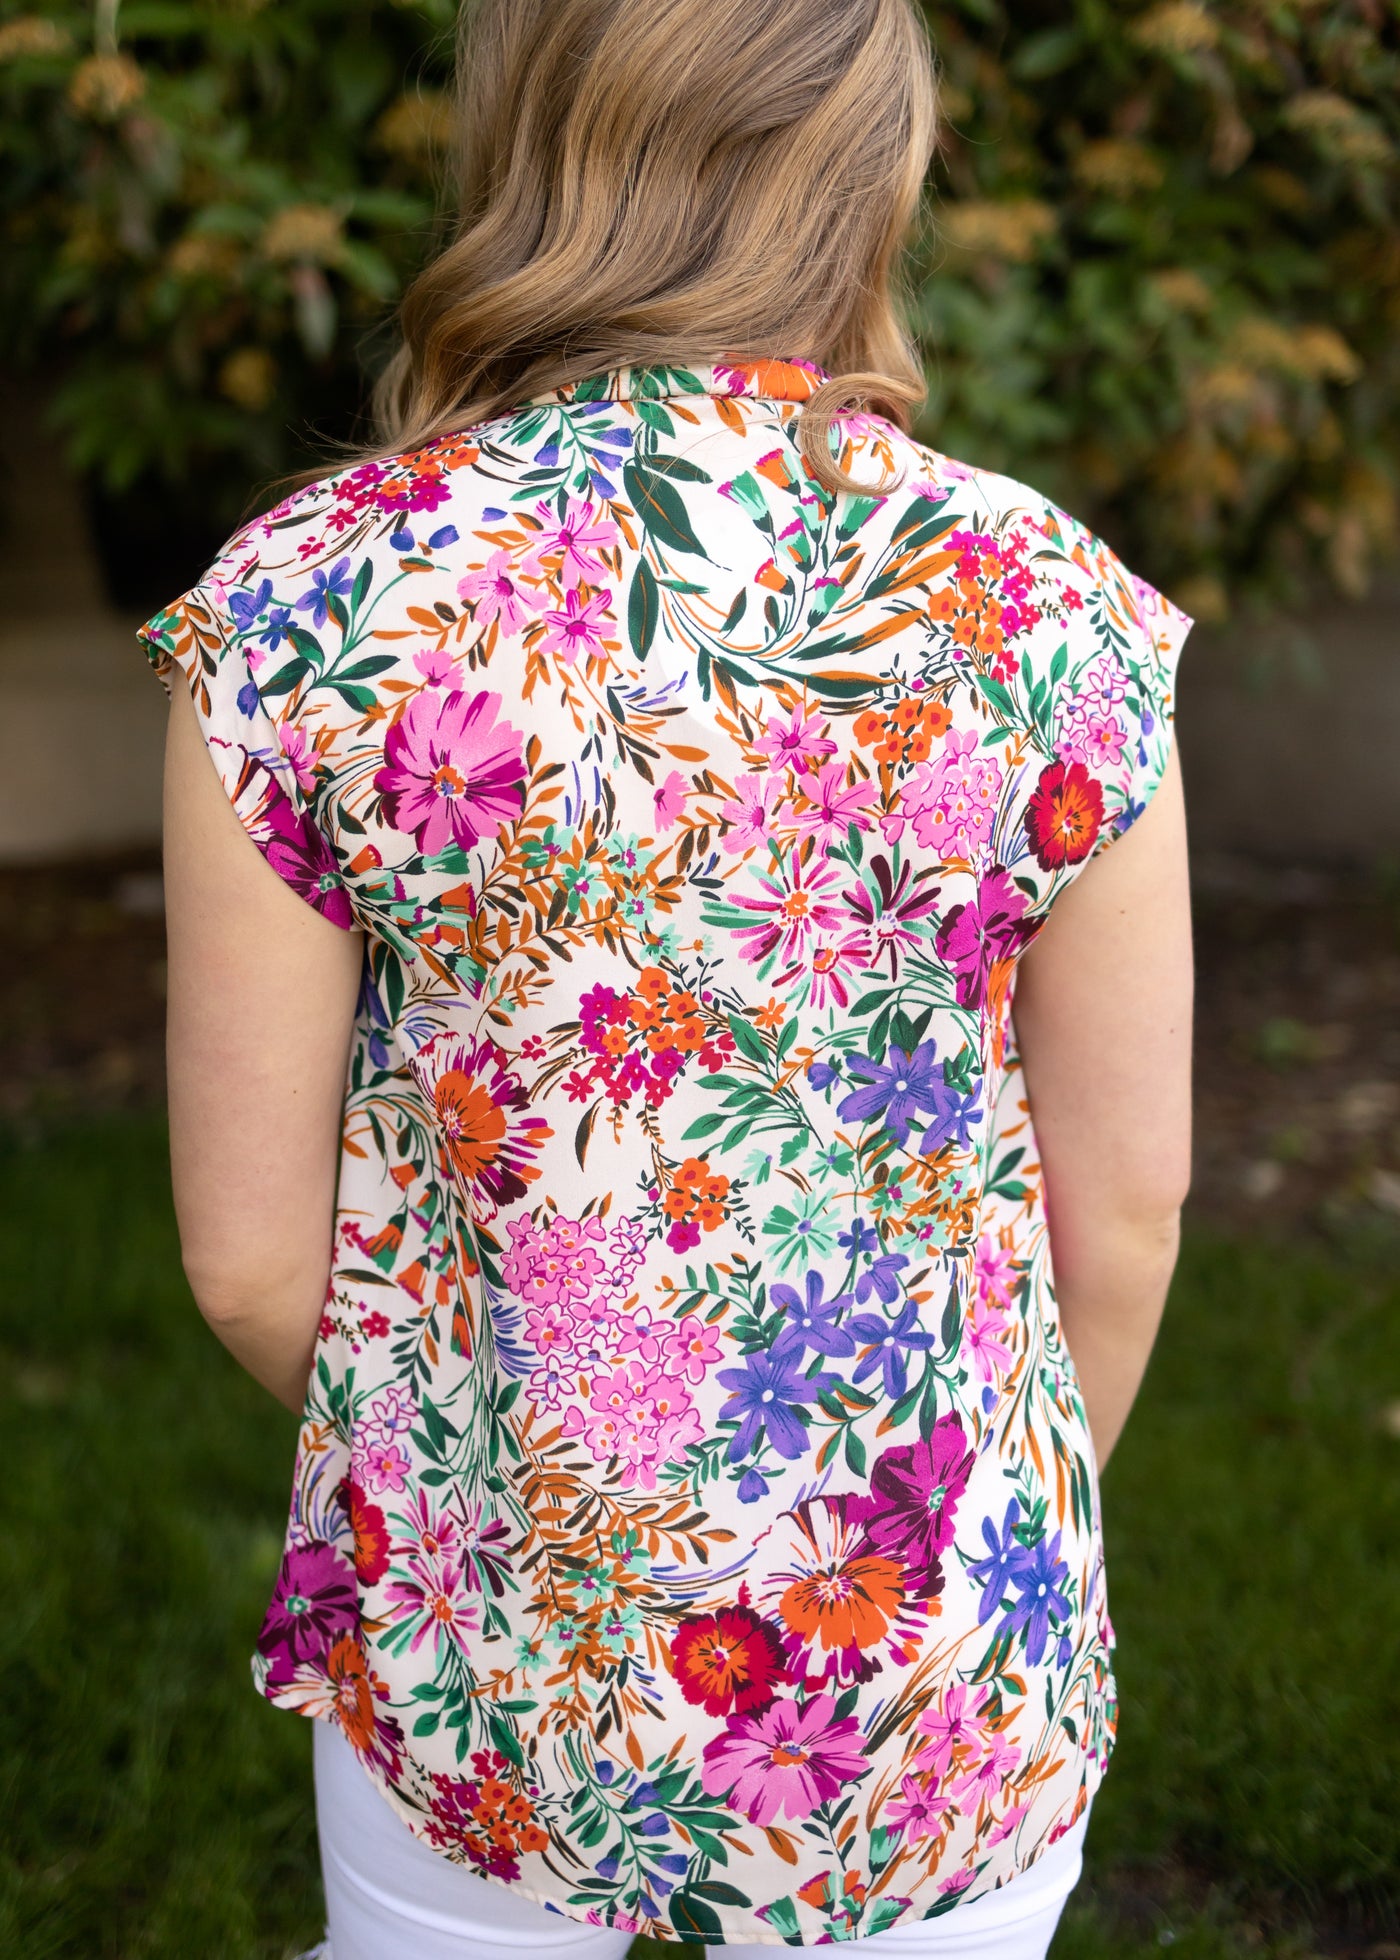 Back view of a floral top